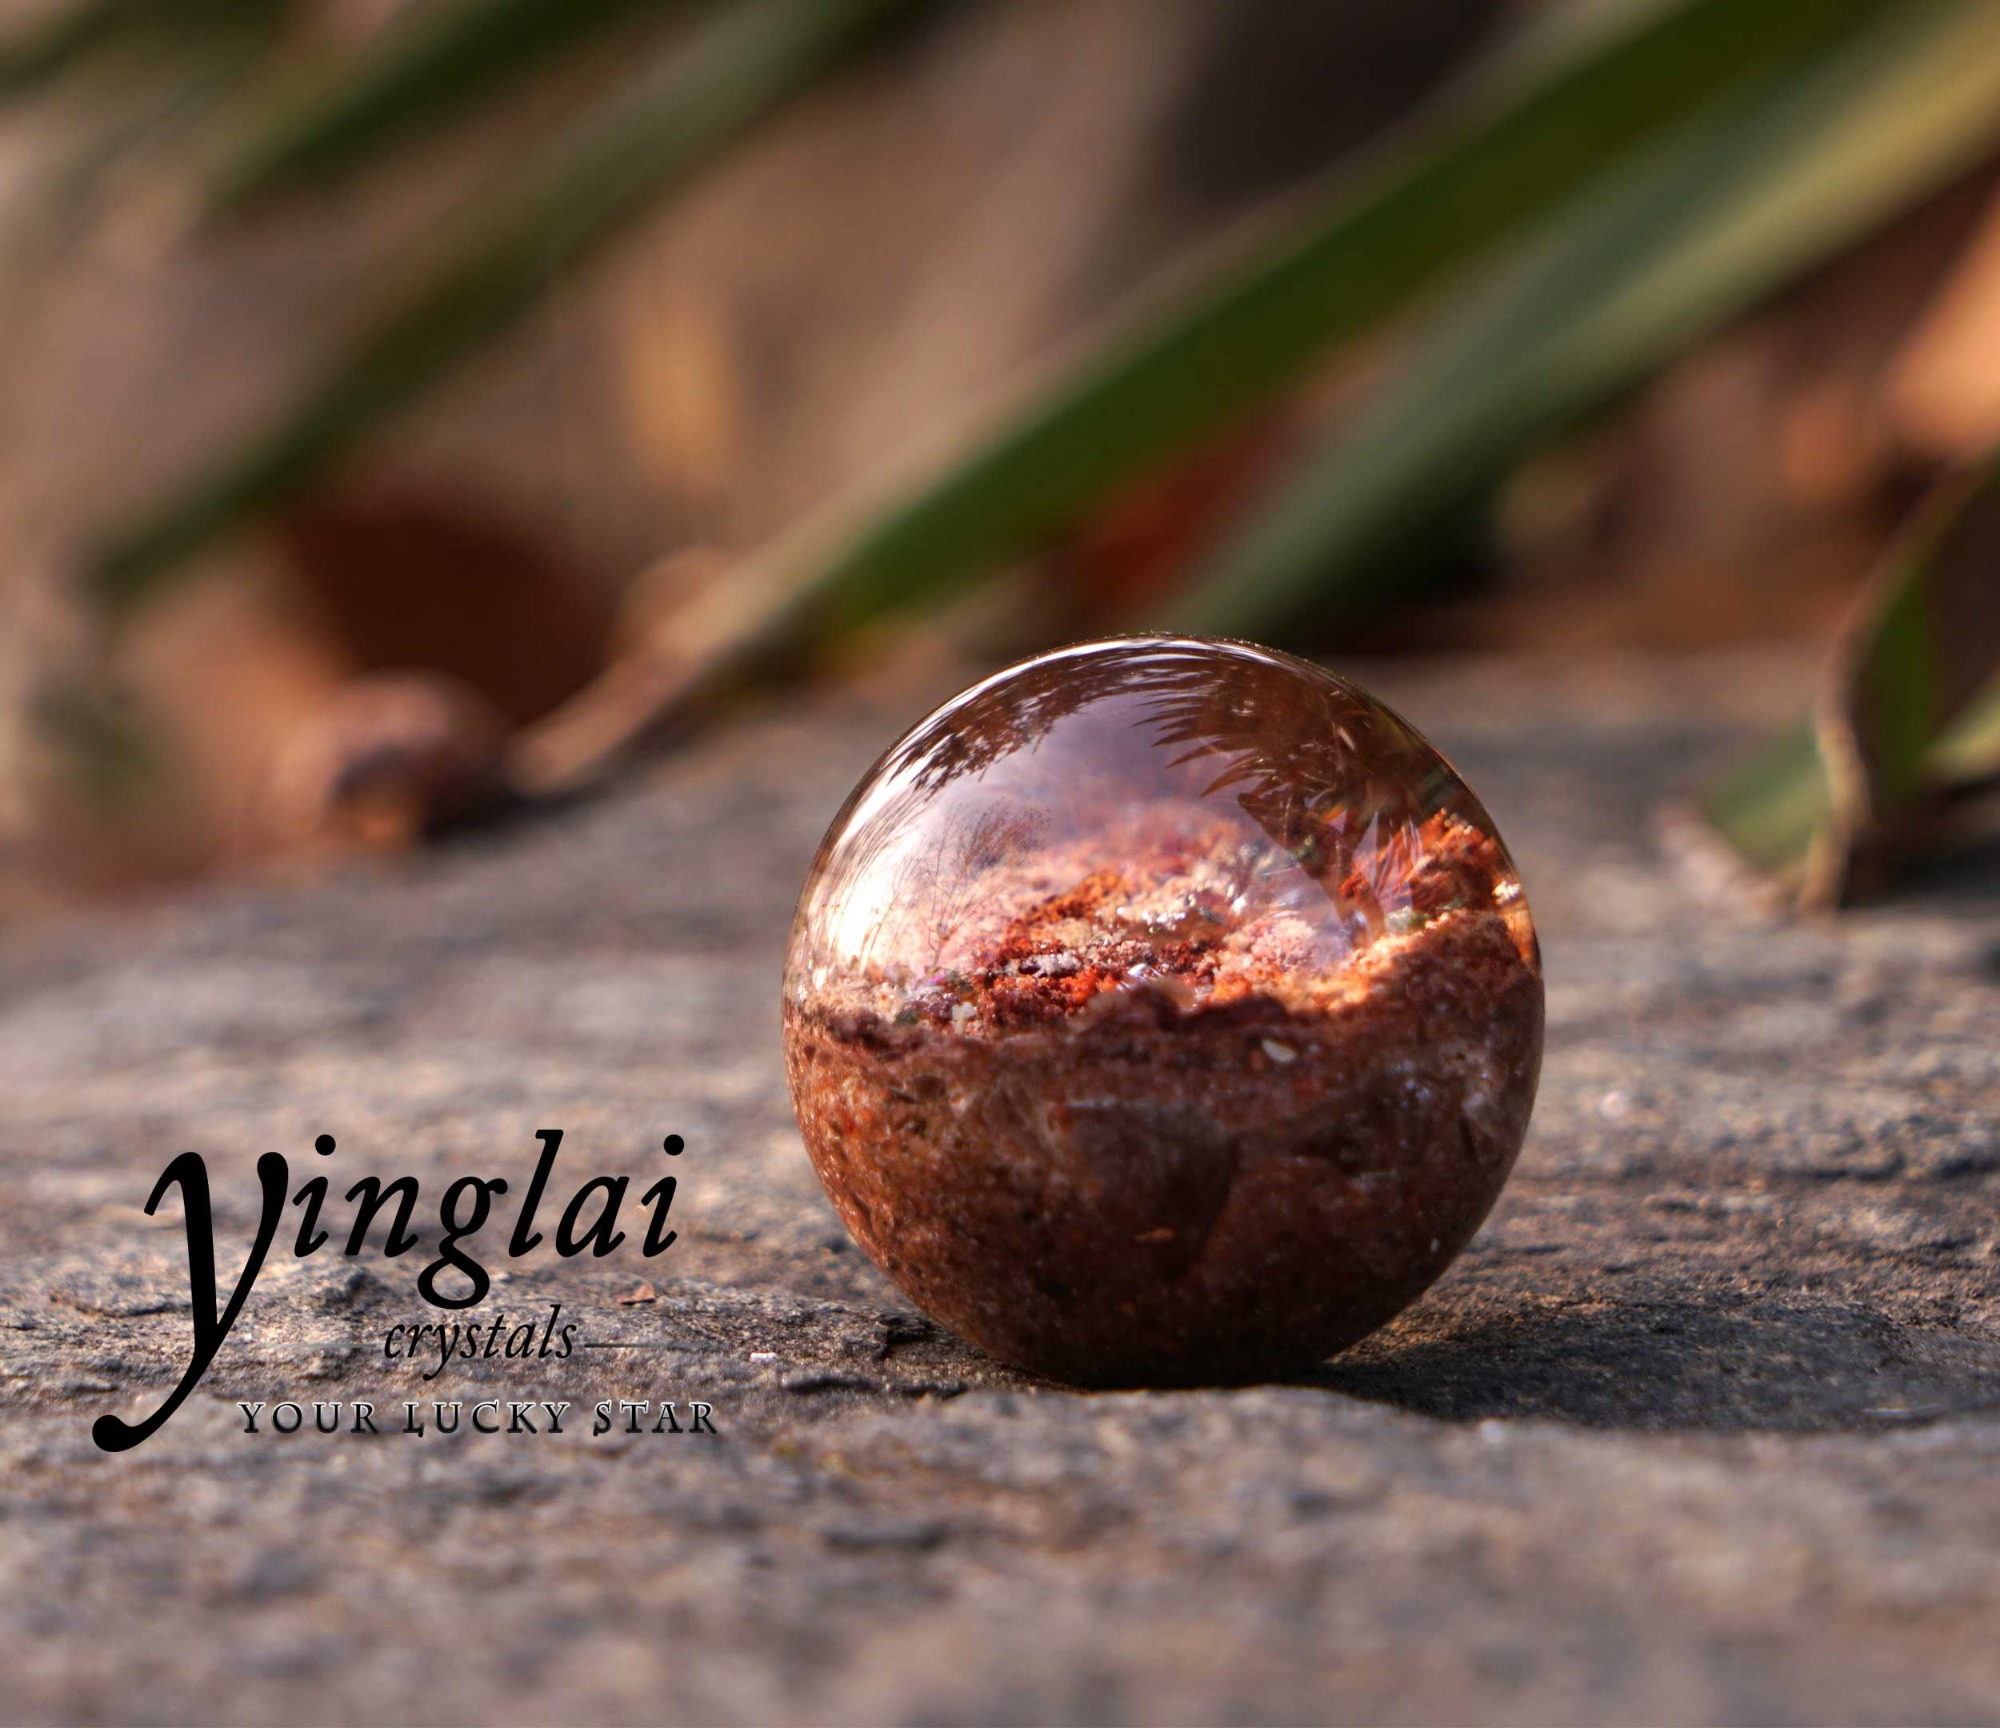 Yinglai 1.6 Crystal Sphere Phantom Quartz Scenic Garden Spheres, Natural Crystals Sphere, Home Decoration, Unique Crystal Gifts For Her